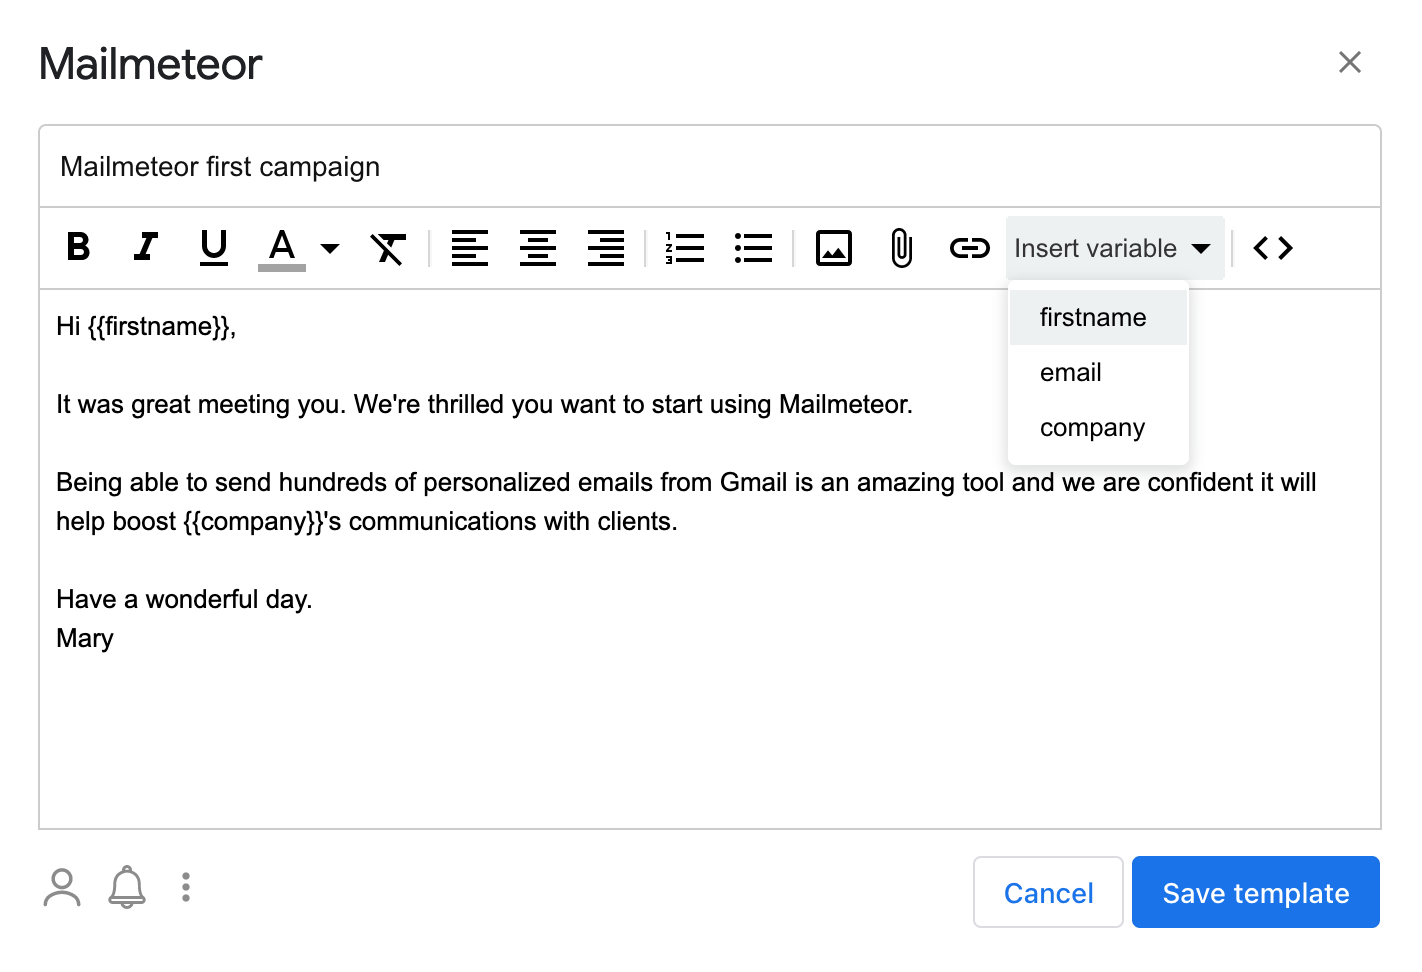 Example of sending a mail merge with personalized attachments